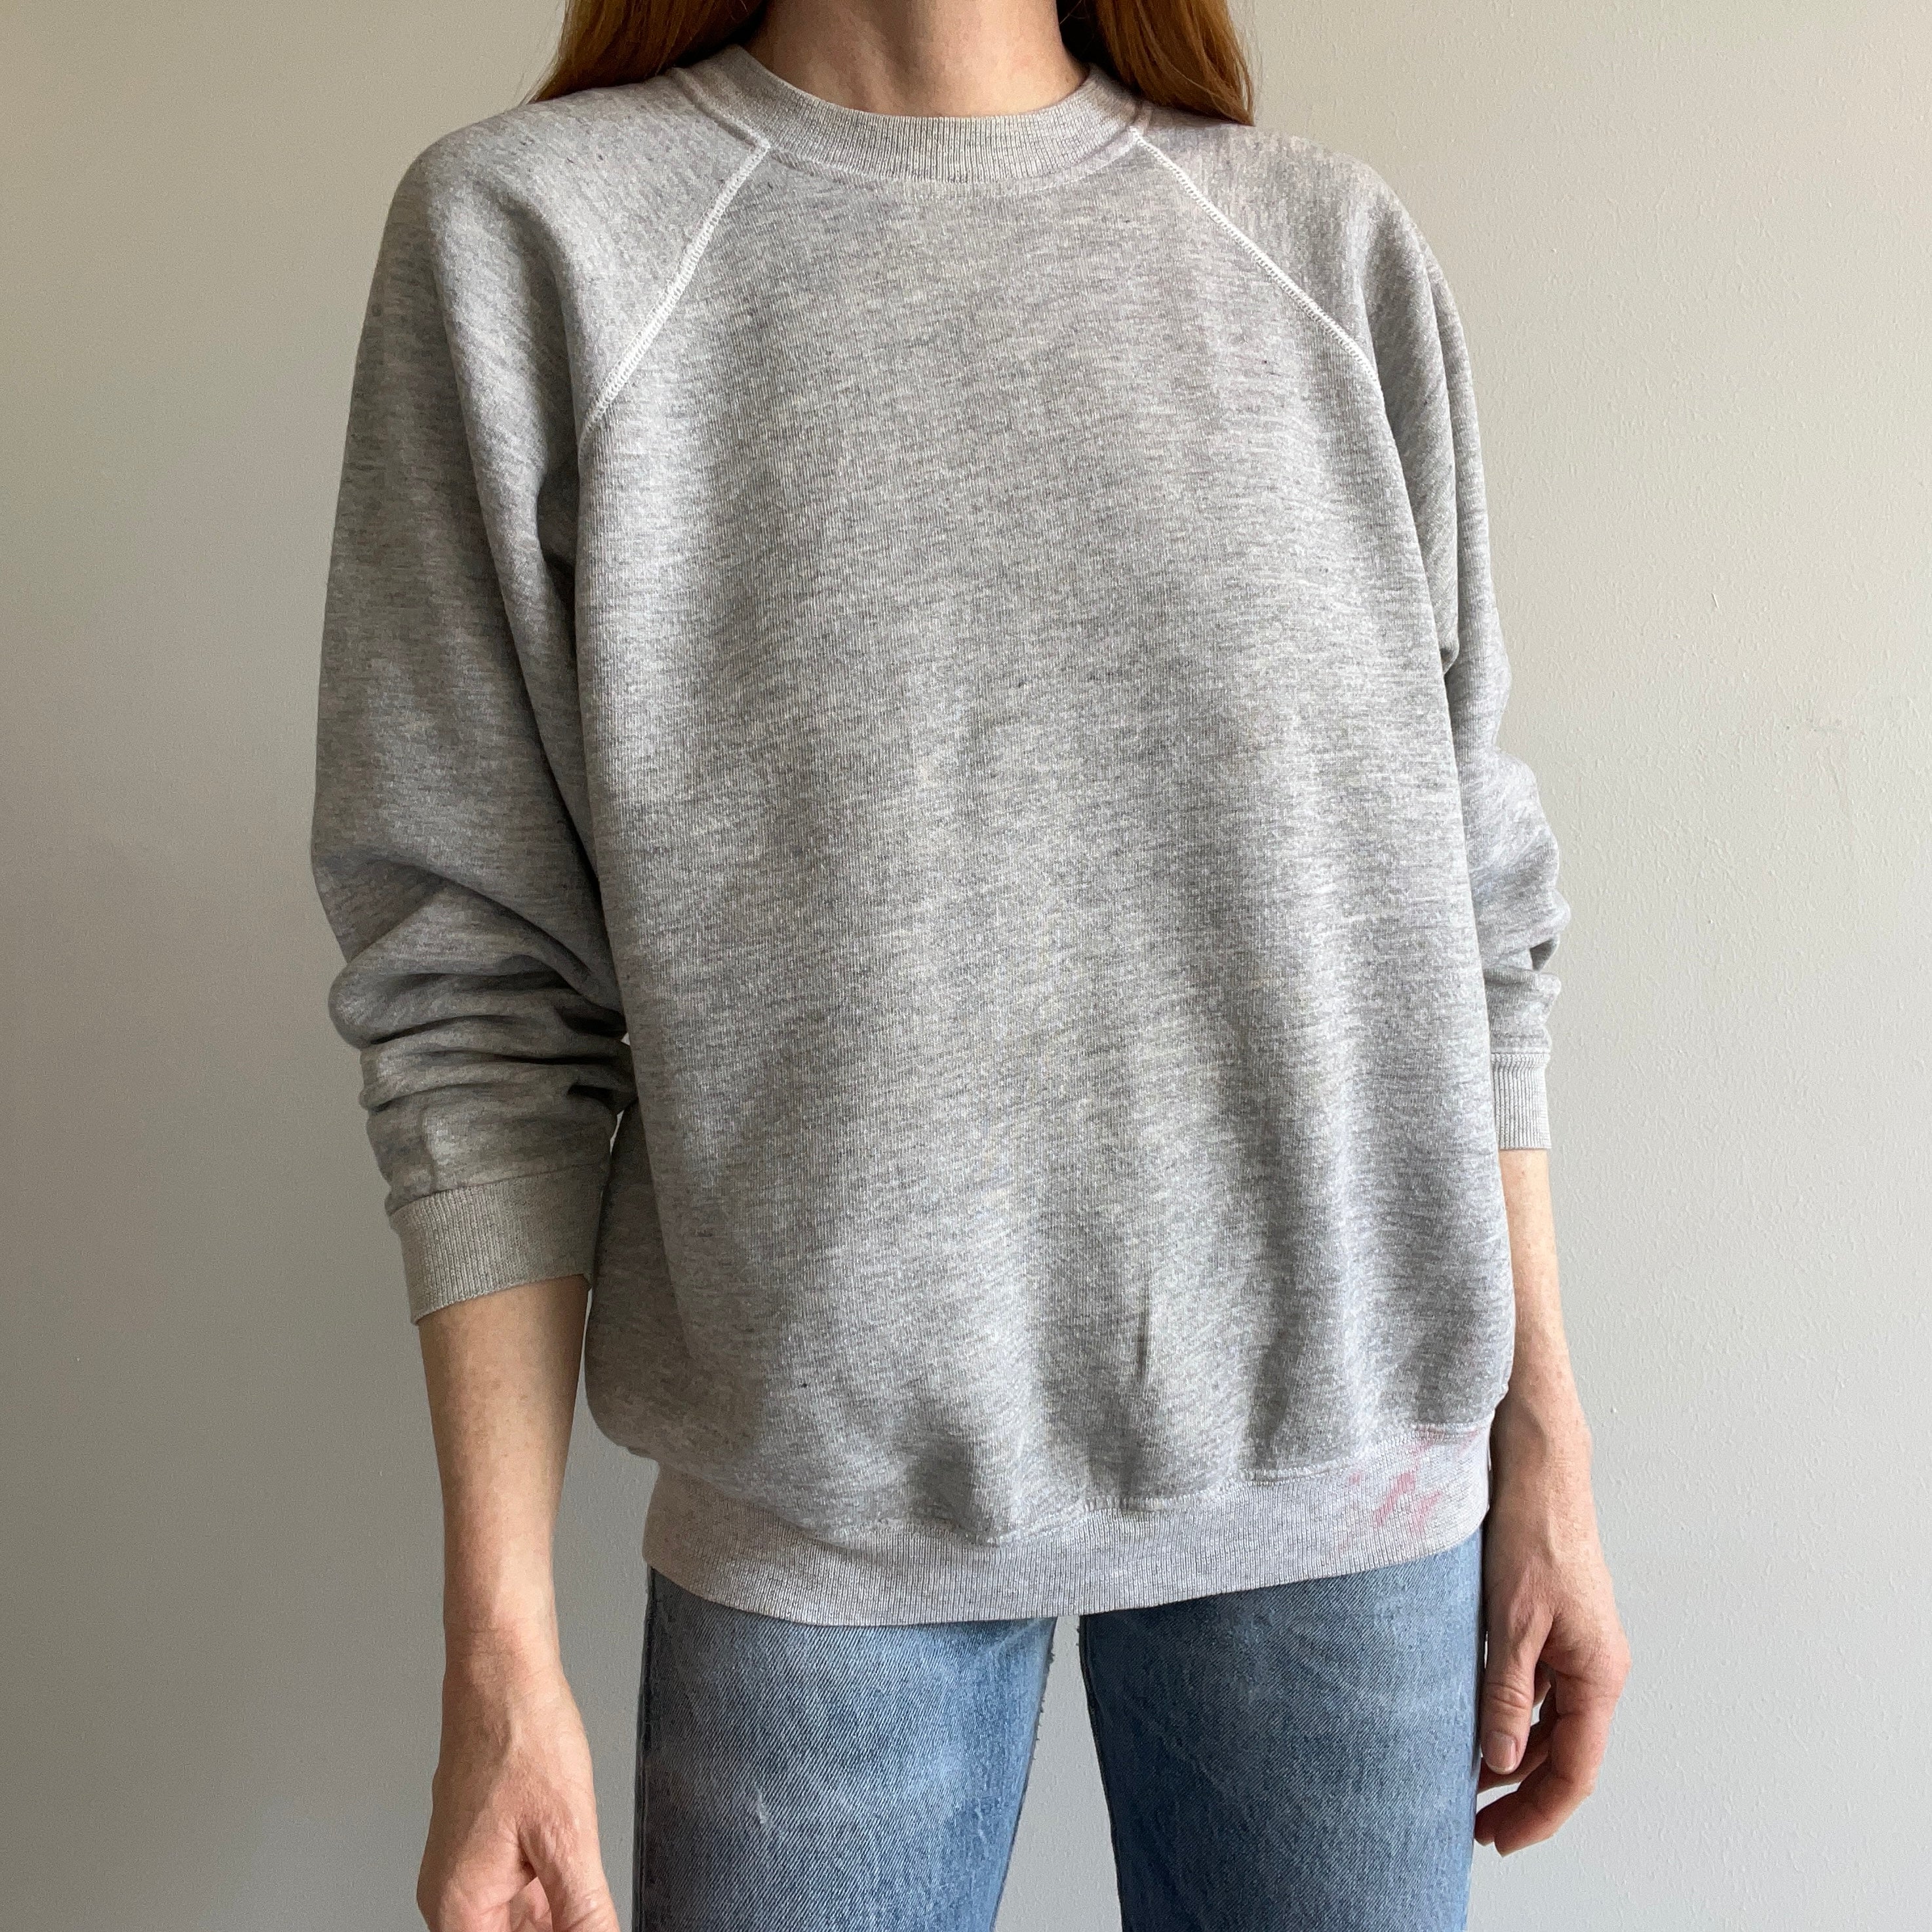 1970s Super Rad Super Stained Contrast Stitching Blank Gray Raglan